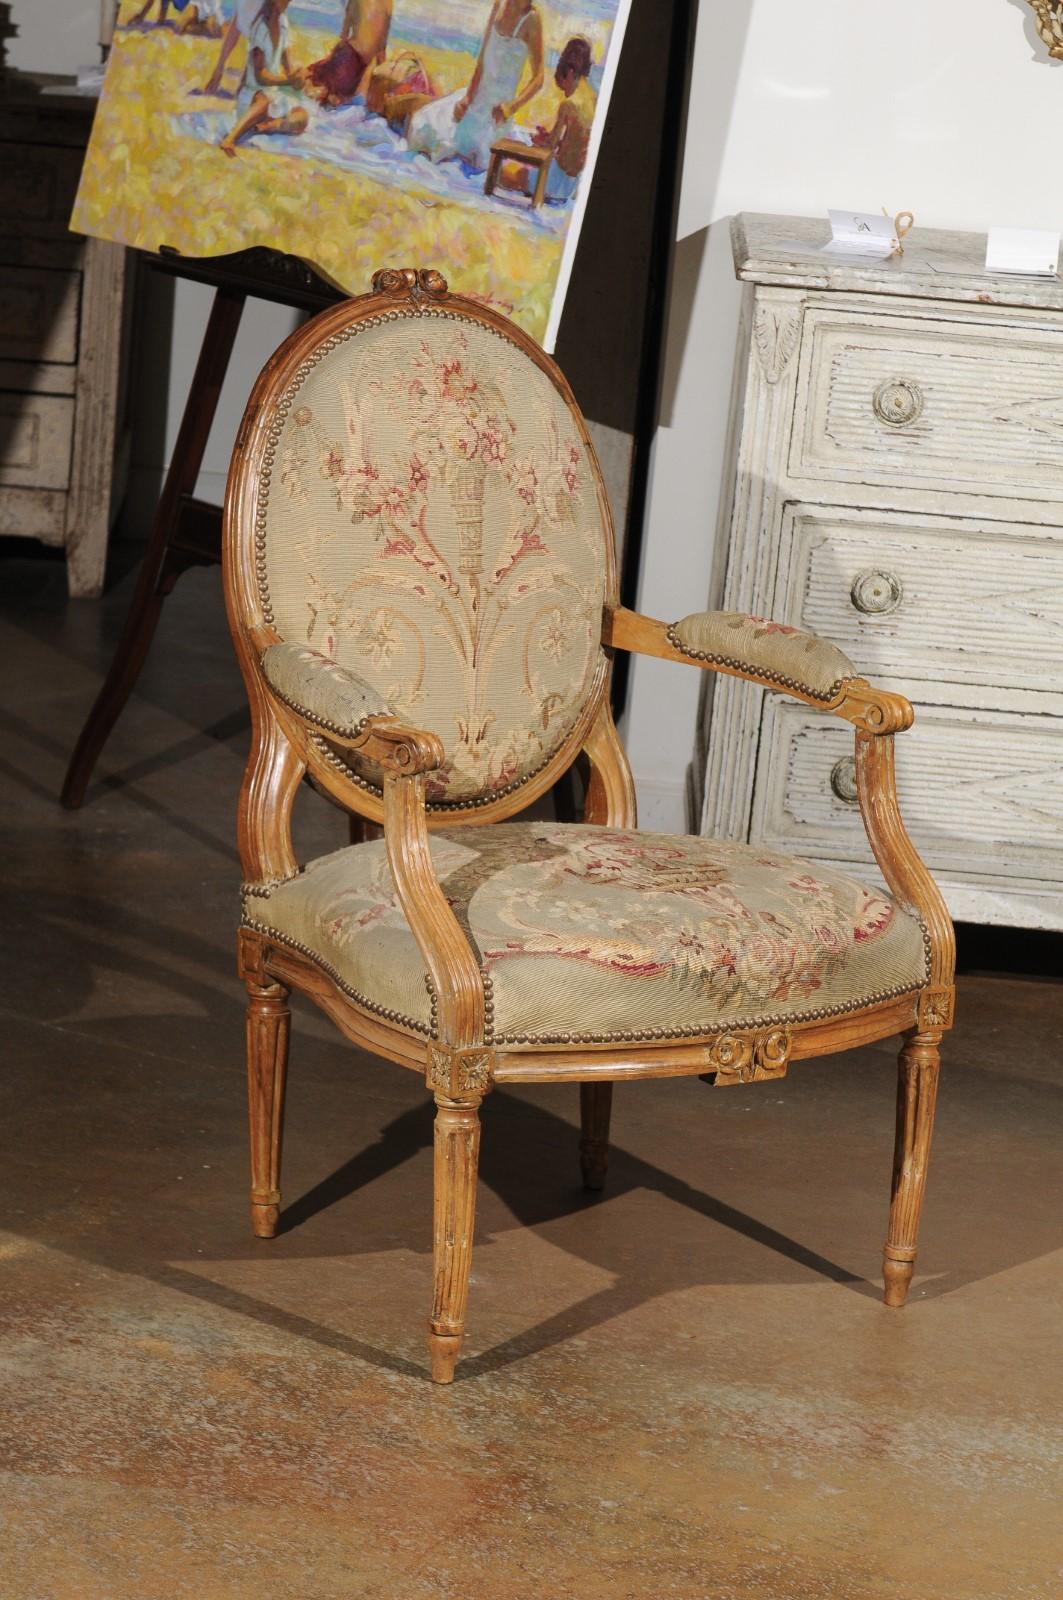 A French Louis XVI period carved wood armchair from the late 18th century with oval back and tapestry upholstery. Born during the second half of the 18th century, this exquisite single armchair features a molded oval back, adorned with carved roses